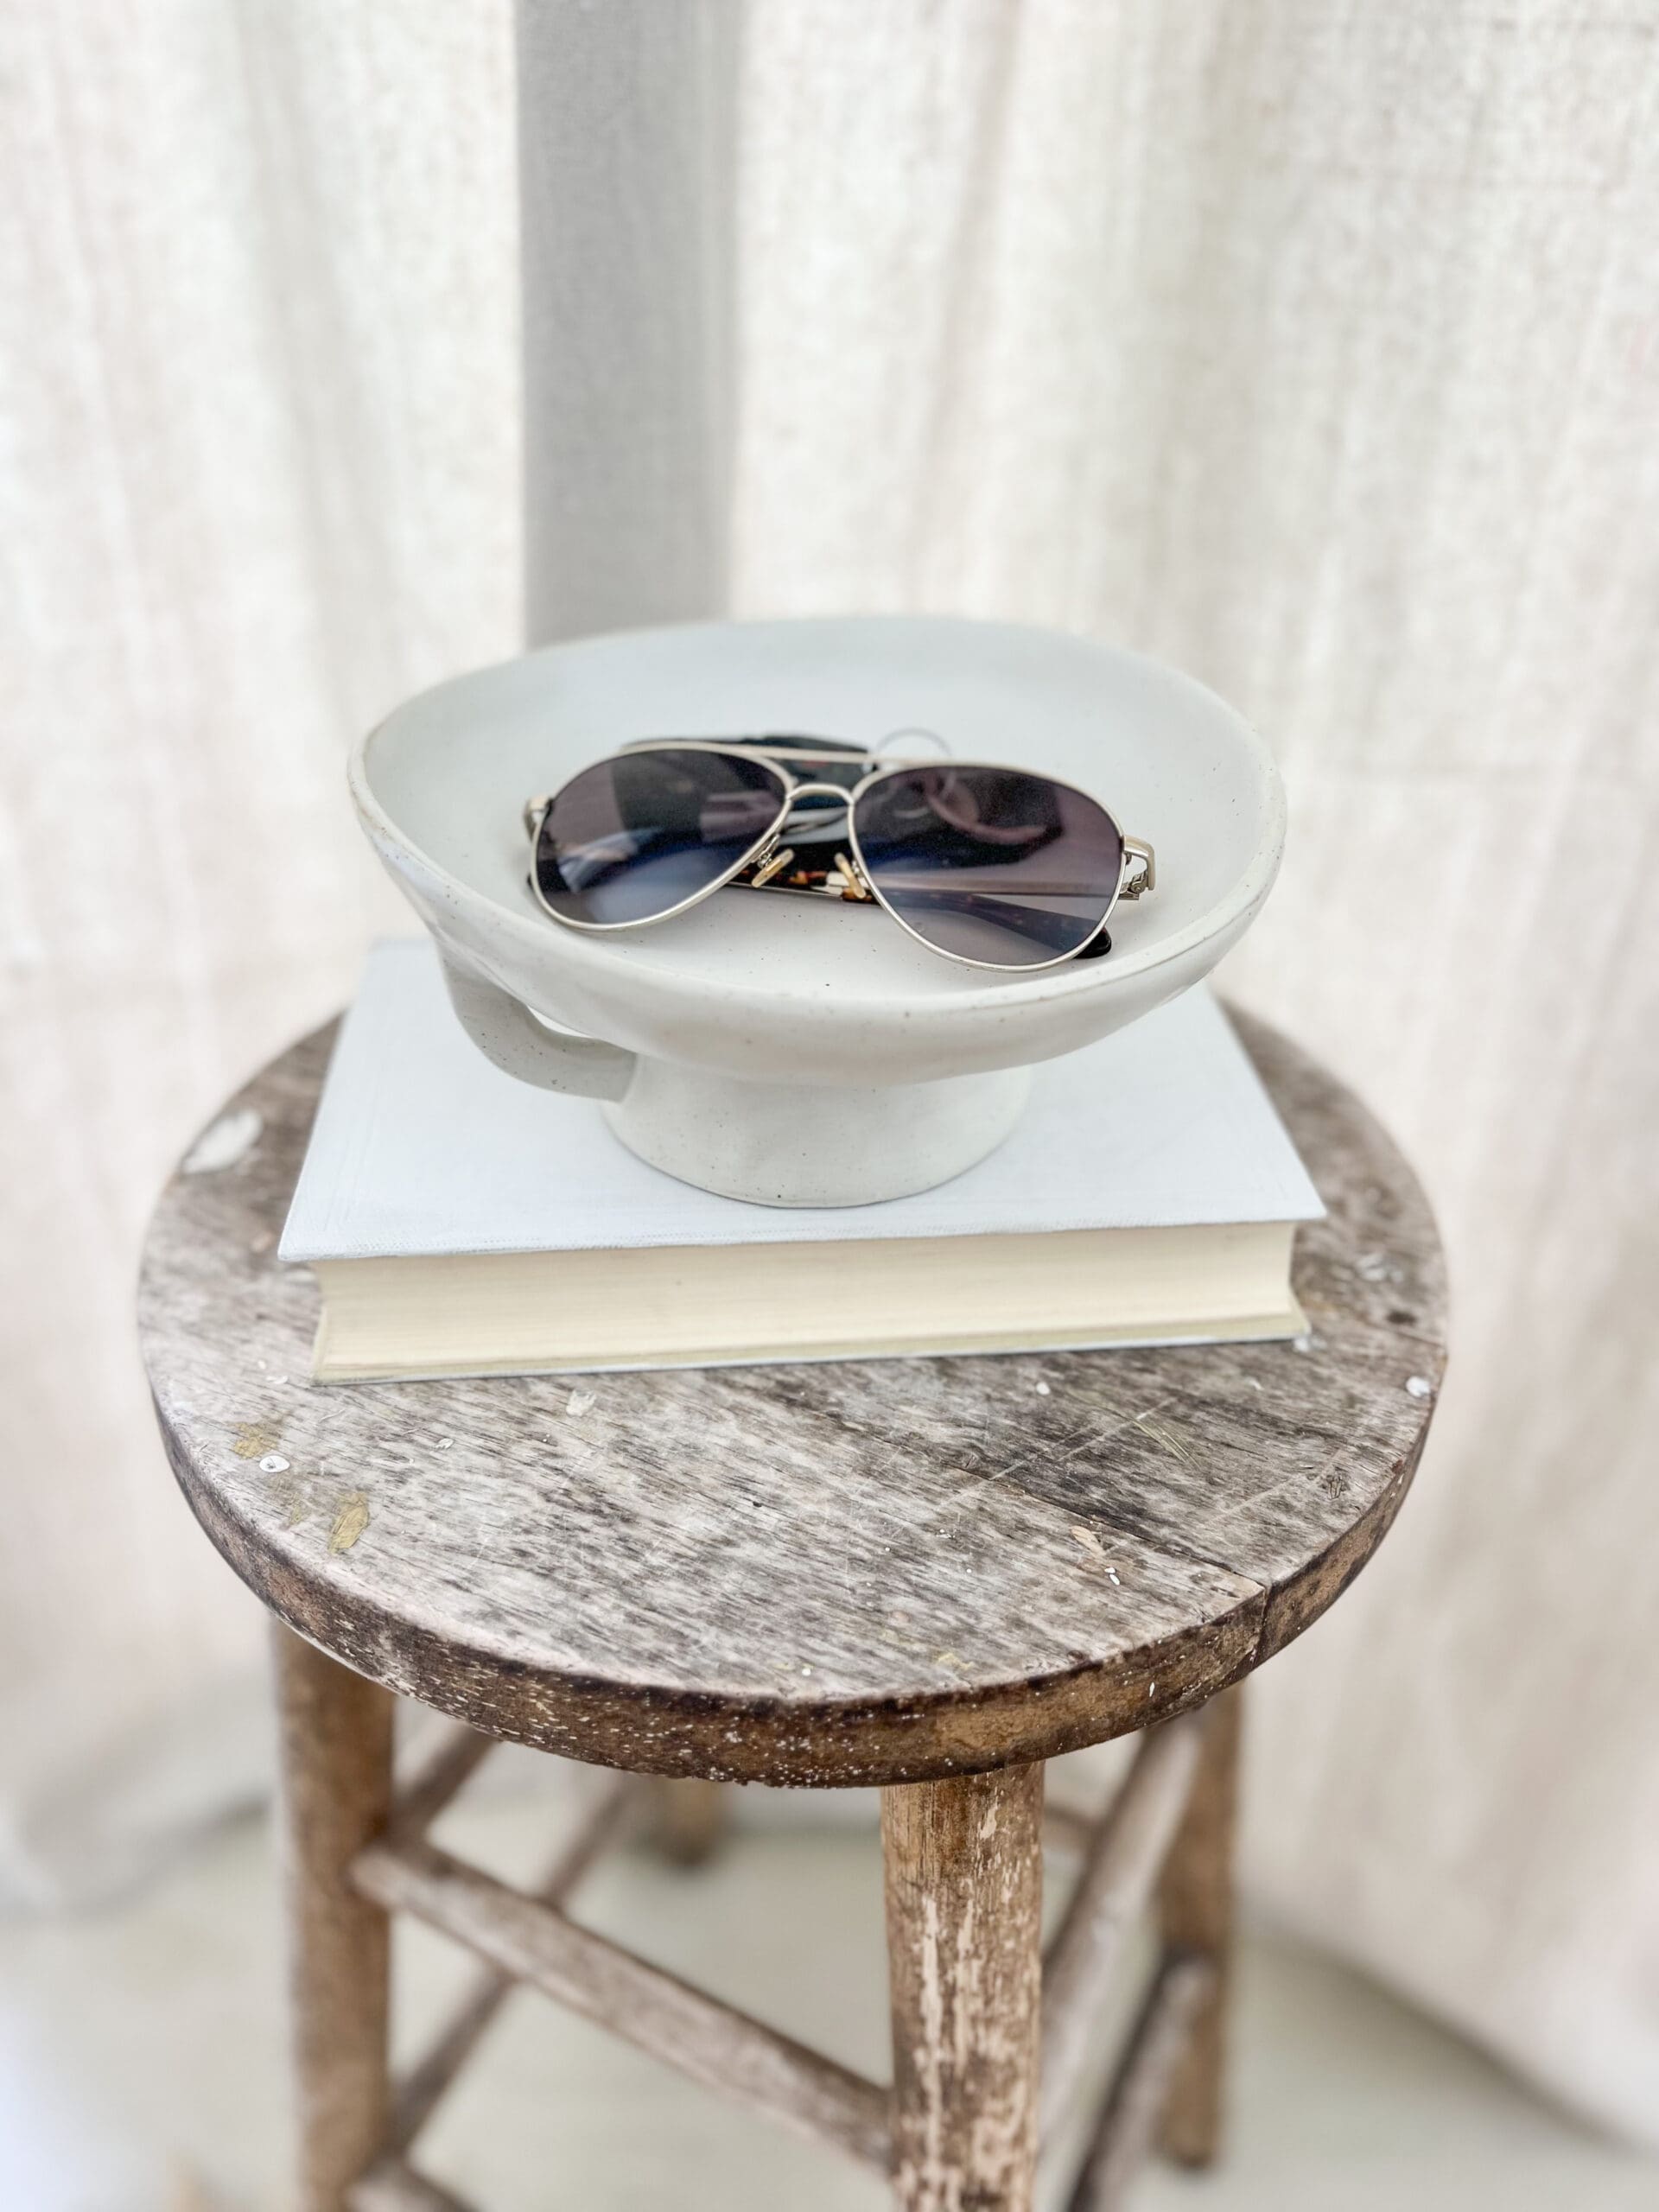 Pair of sunglasses in a white bowl on a wooden stool